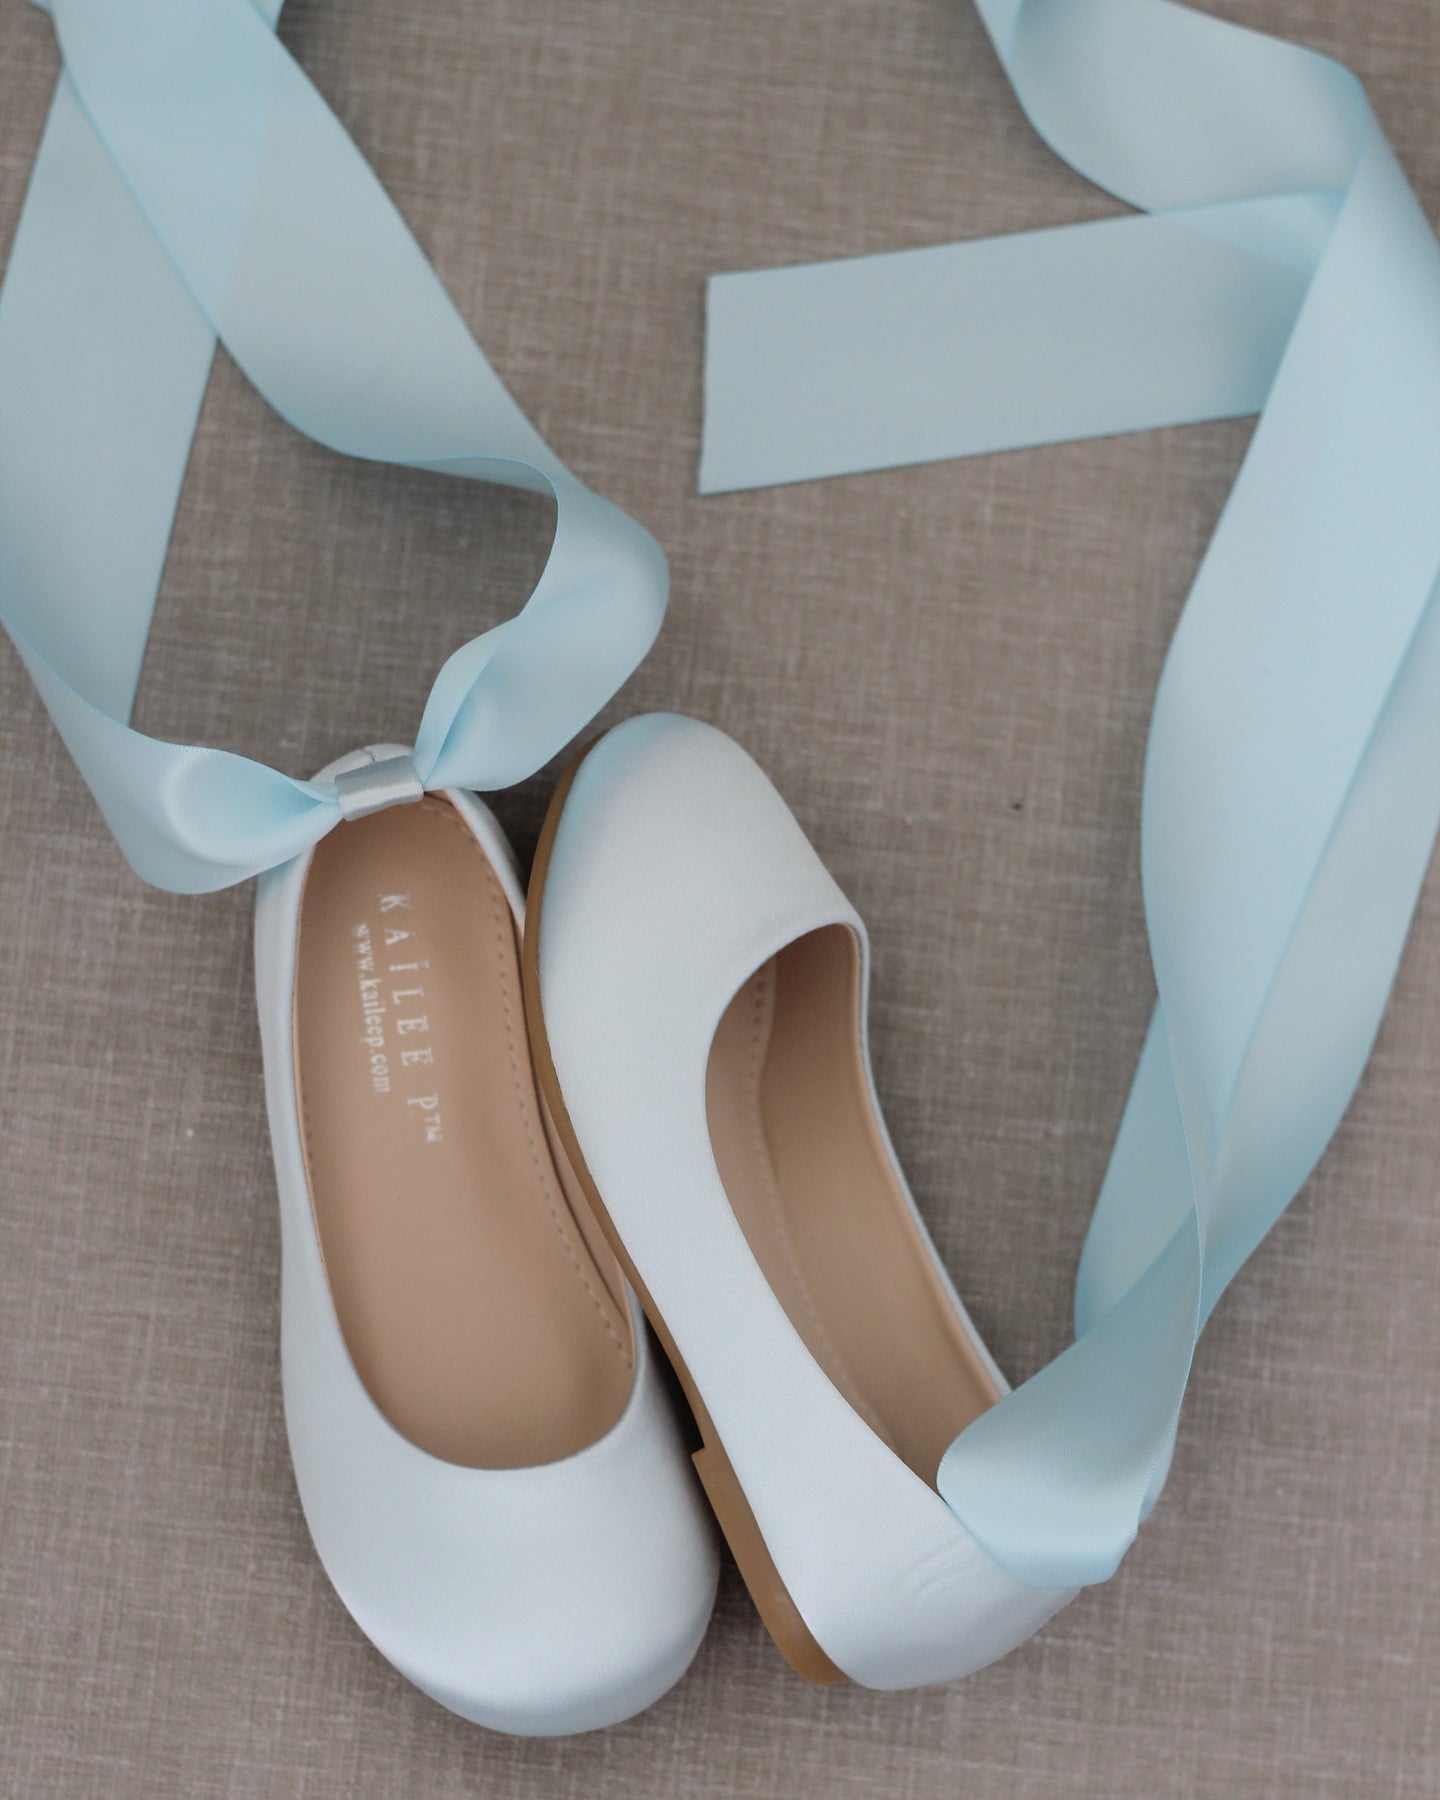 Light Blue Ankle Tie or Ballerina Lace Up Flats - Flower girls party shoes